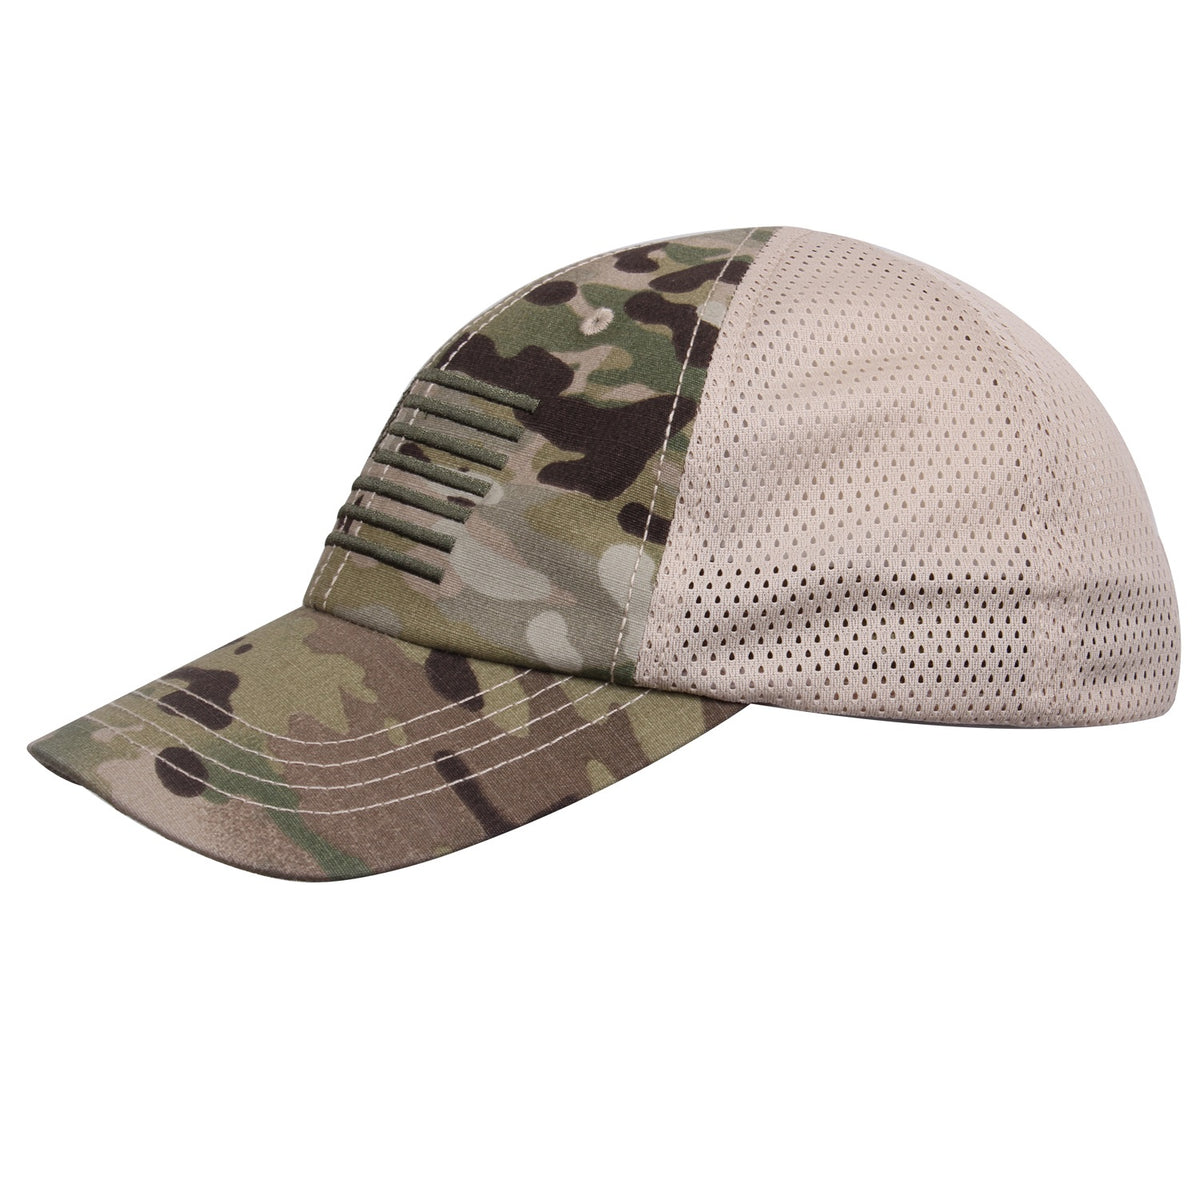 Rothco Tactical Mesh Back Cap With Embroidered US Flag Multicam